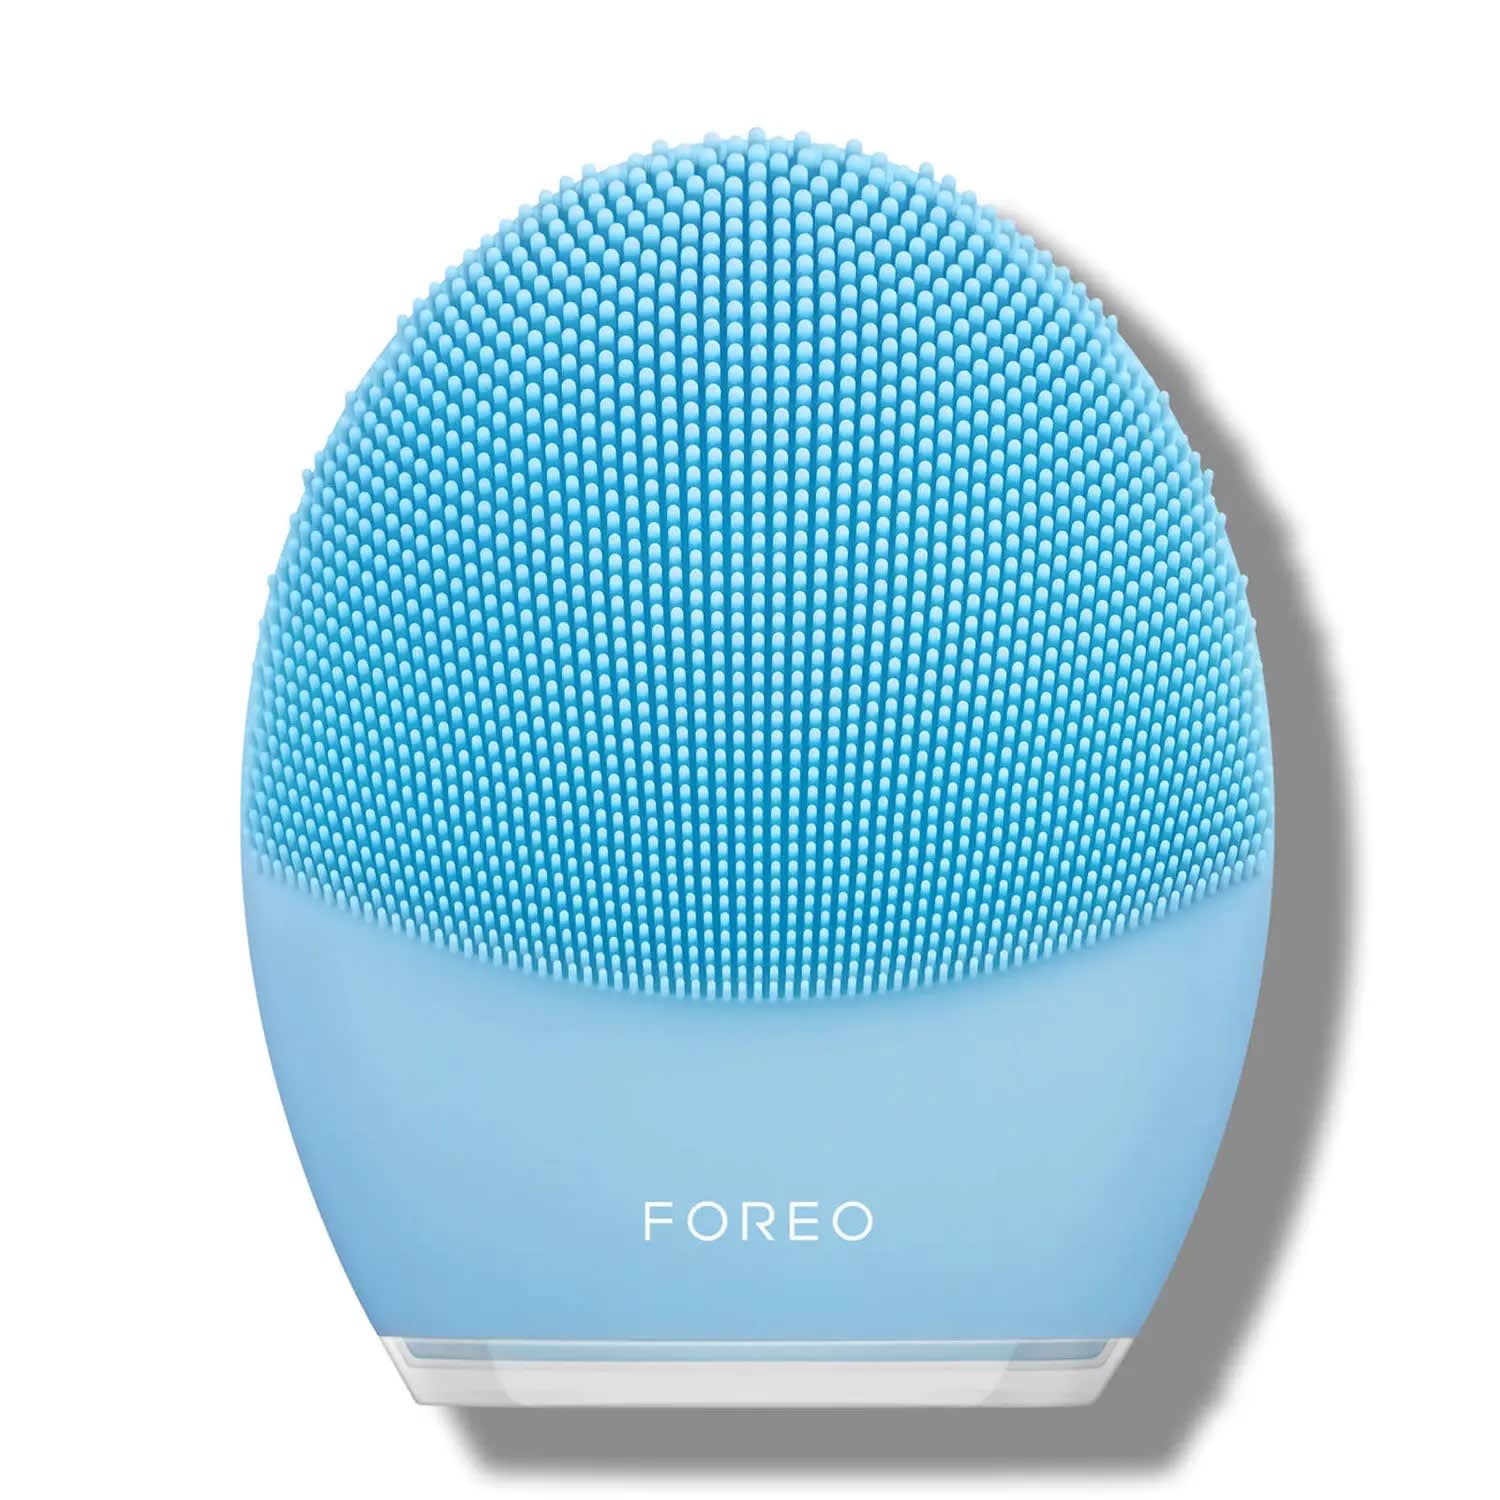 Foreo discount code